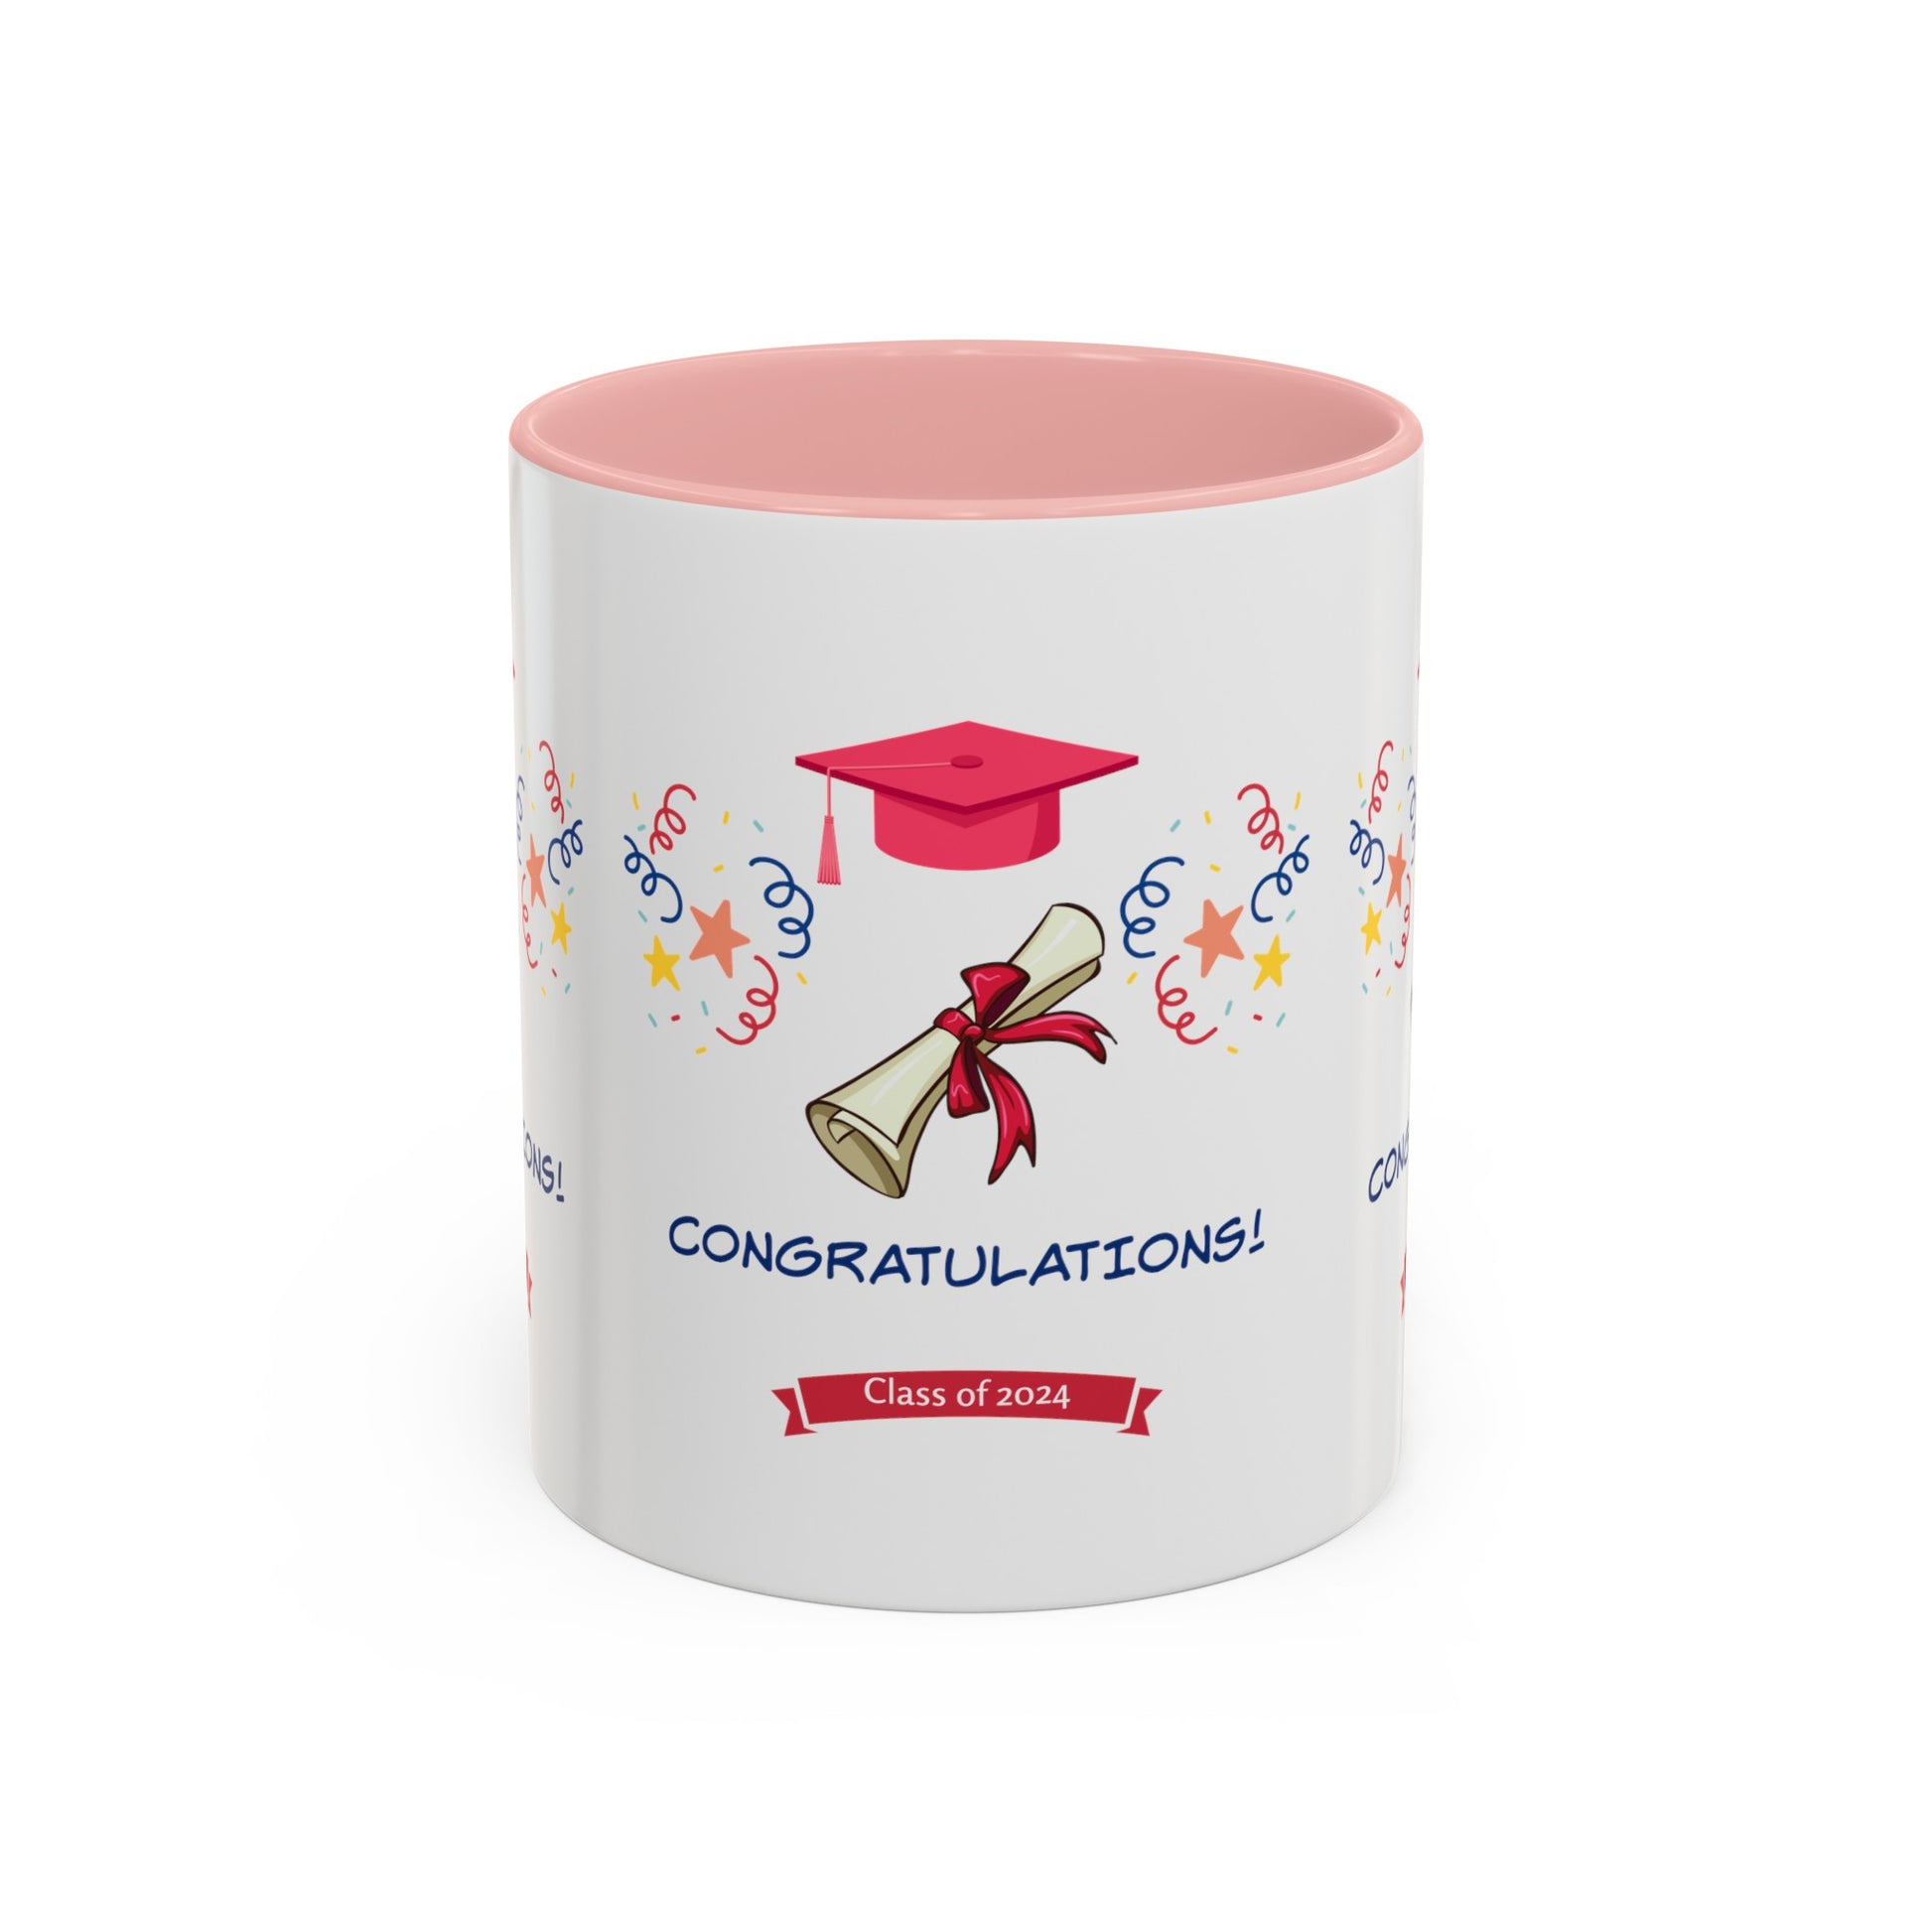 A white mug with a pink interior proudly displays "Congratulations! Class of 2024," surrounded by festive decorations including a graduation cap, diploma scroll, and colorful streamers. This Printify 2024 Congratulations Mug: Graduation; 11 oz.; 2 Colors is the perfect way to celebrate your achievement.